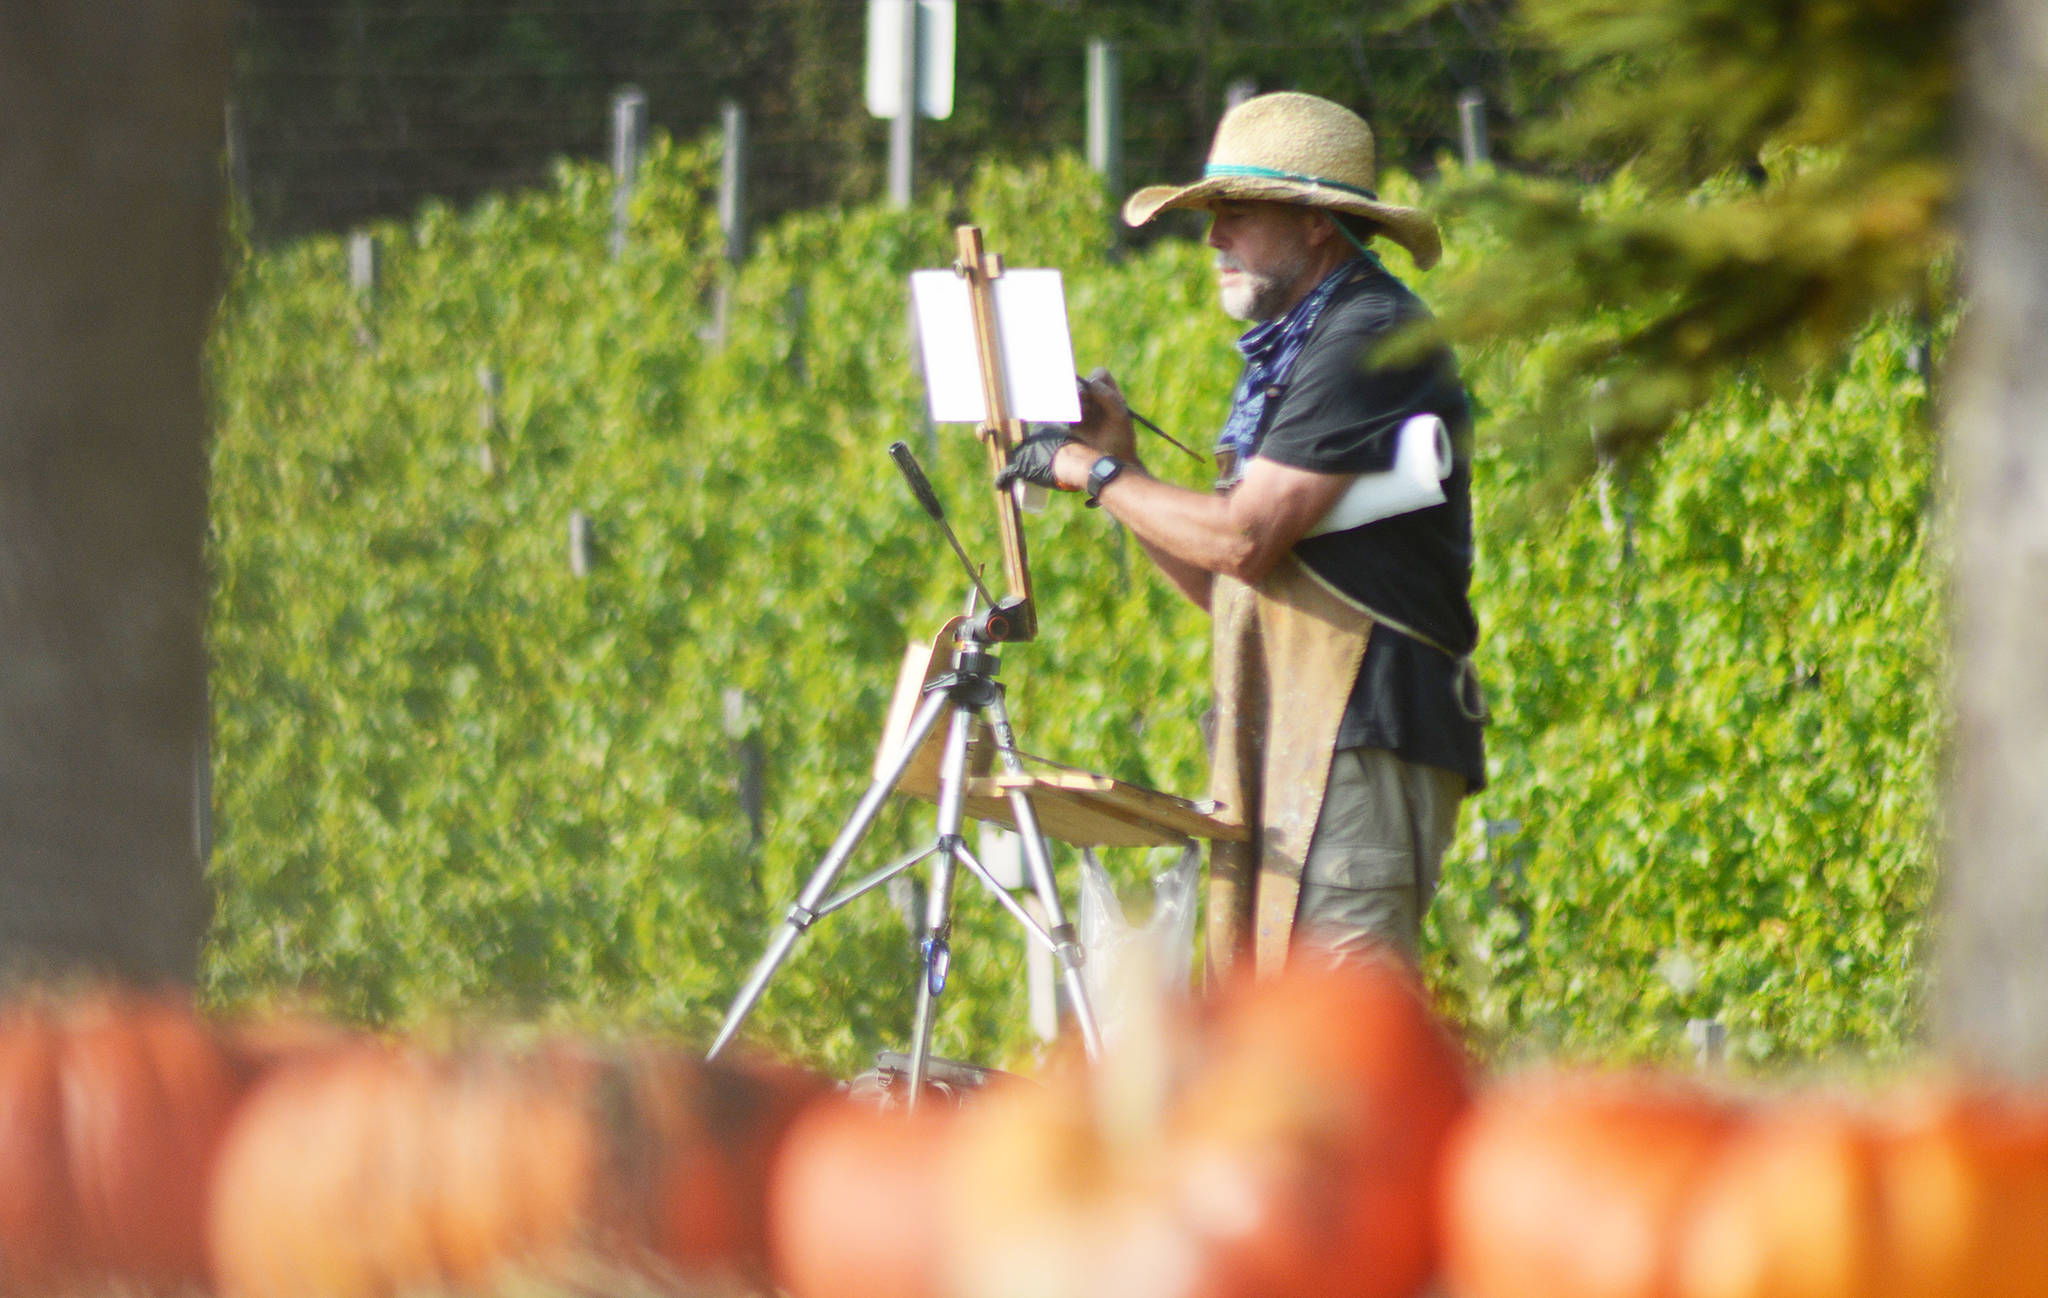 Robin Weiss was one of a few artists who were out at the pumpkin patch painting the fields.